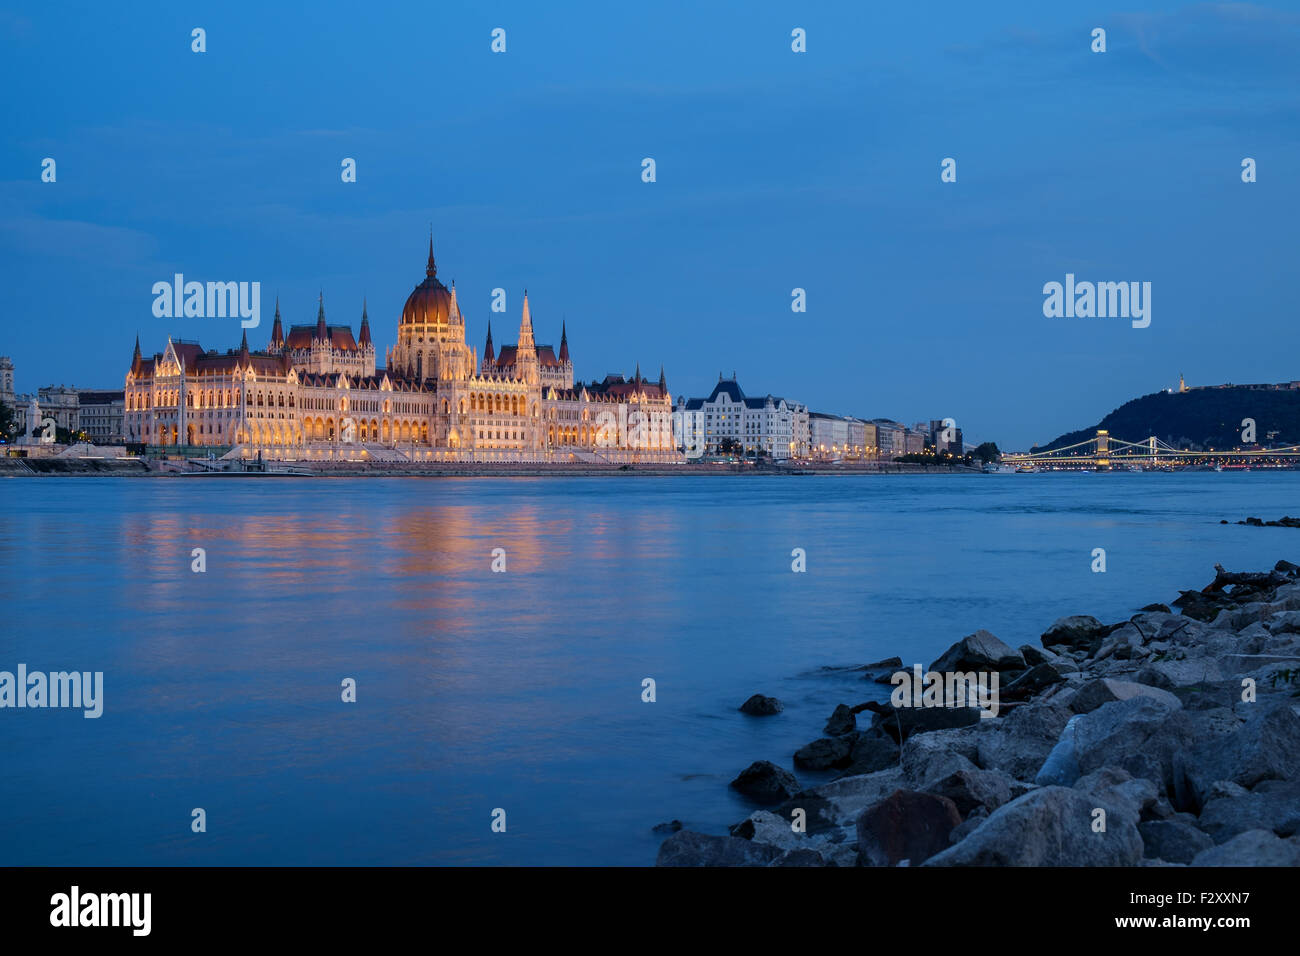 The Hungarian Parliament building at night, Budapest, Hungary Stock Photo